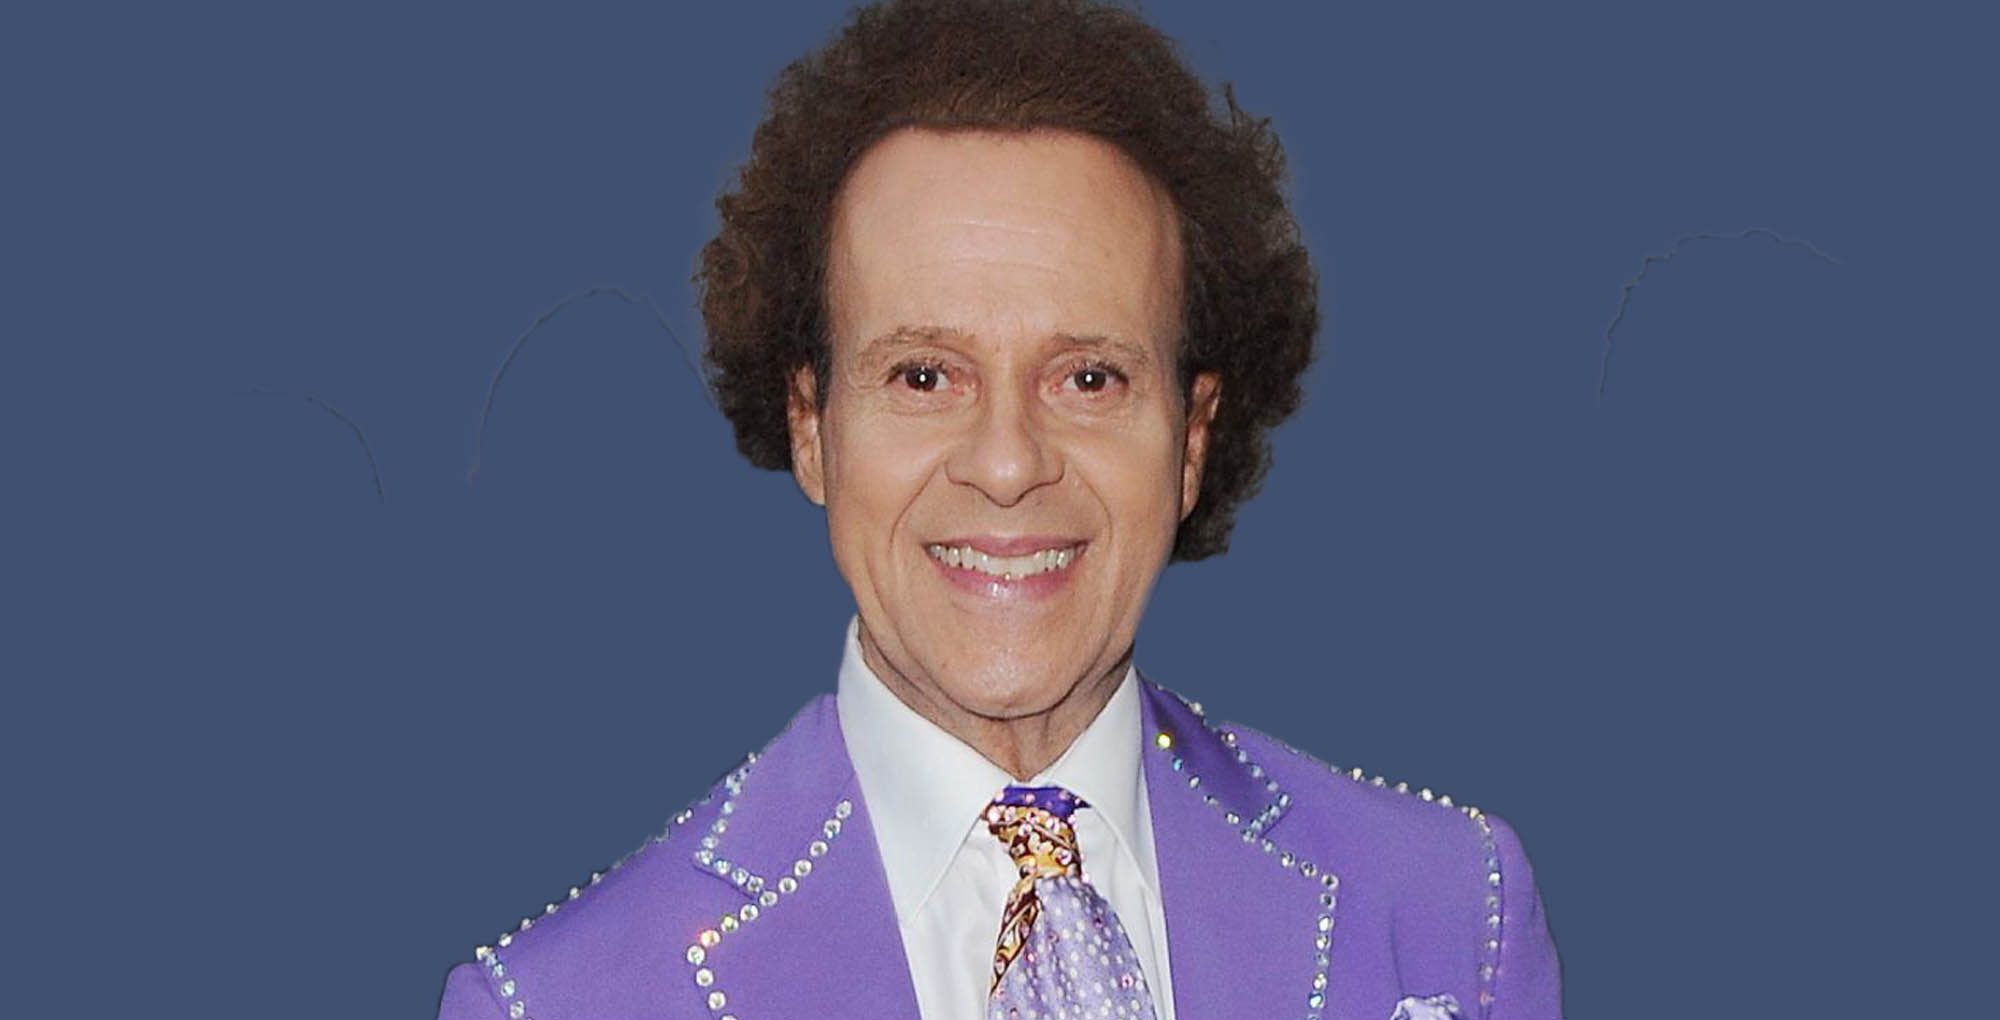 general hospital alum richard simmons wearing purple against a blue background.